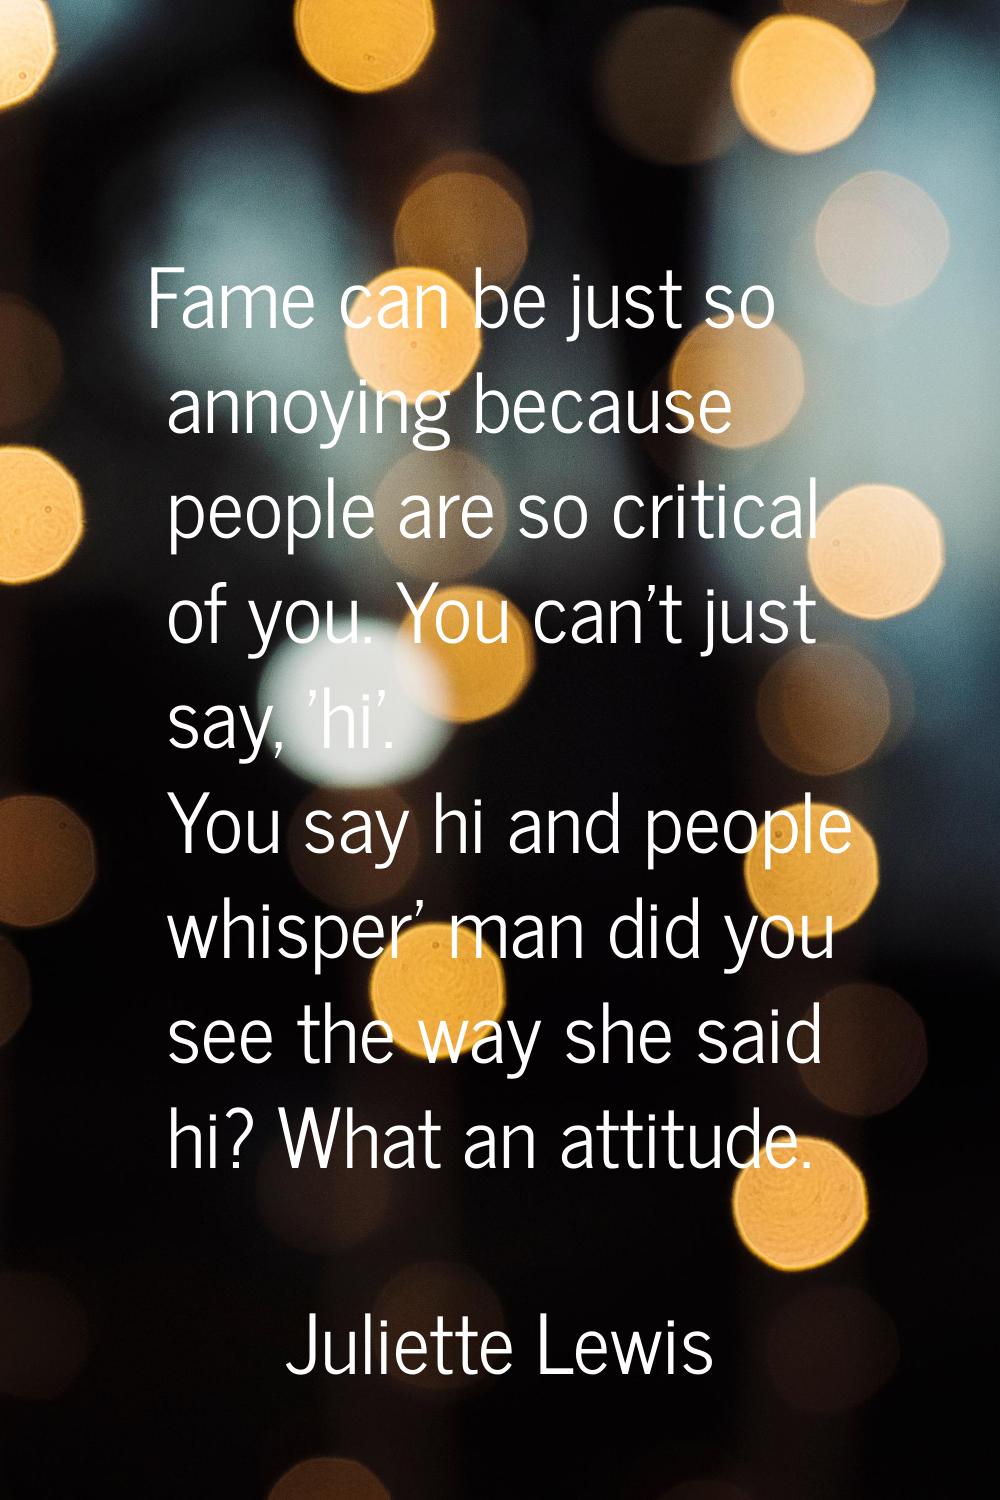 Fame can be just so annoying because people are so critical of you. You can't just say, 'hi'. You s